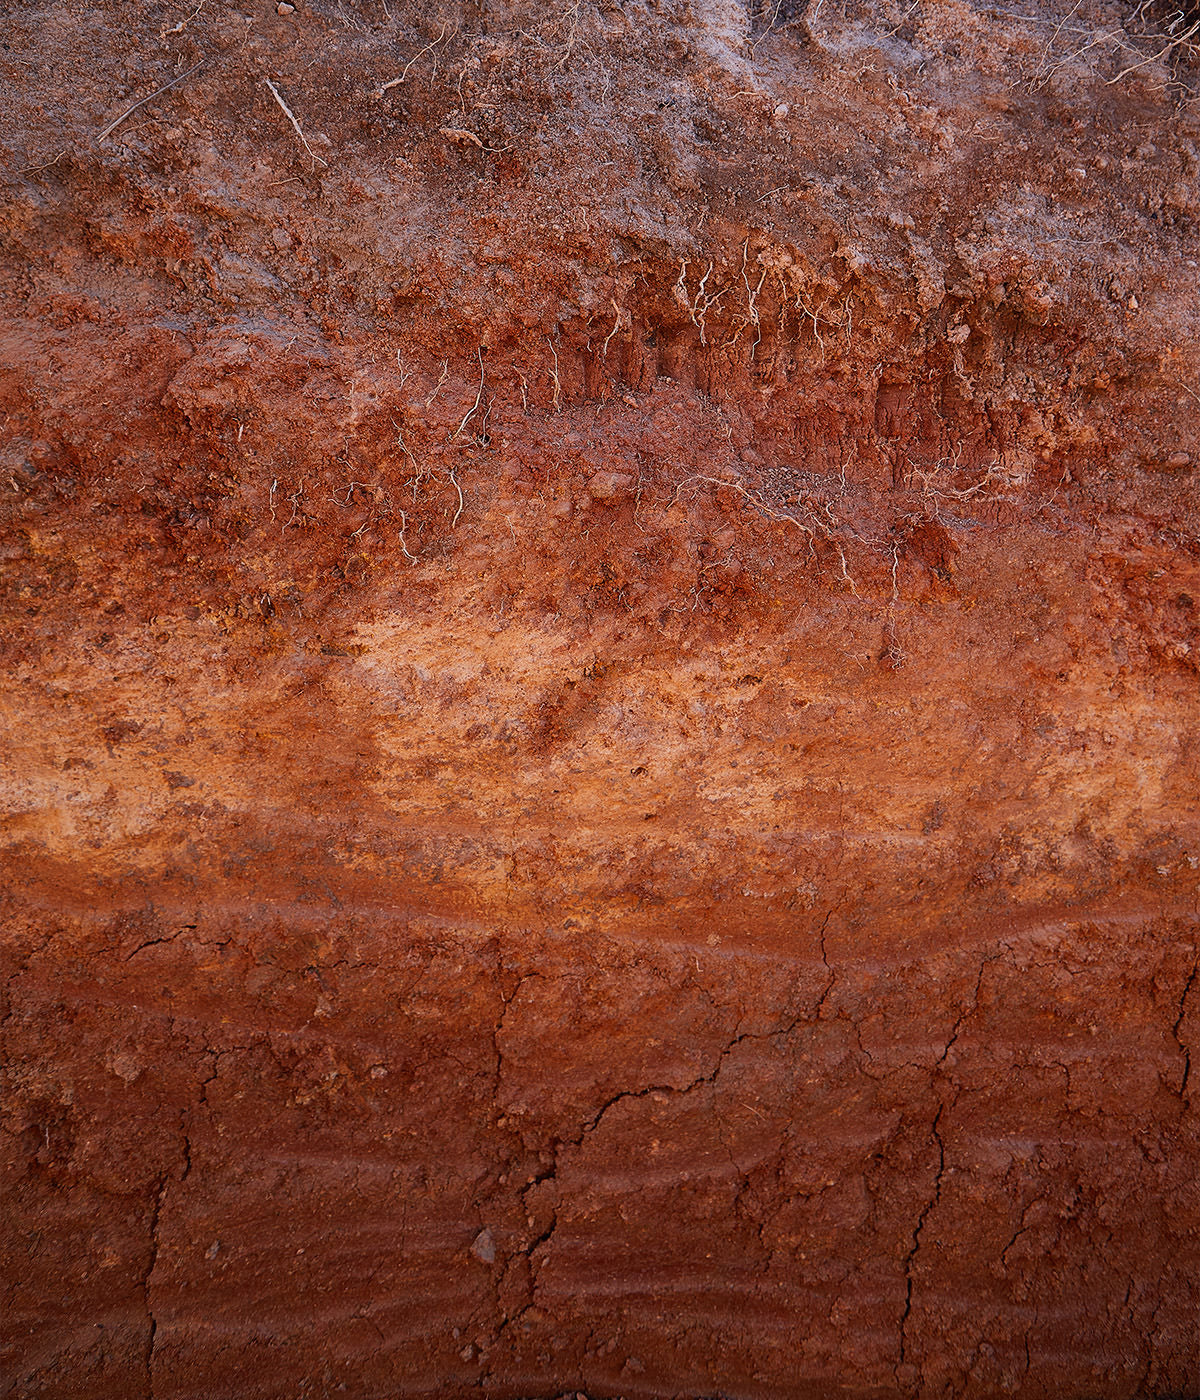 Profile of red soil